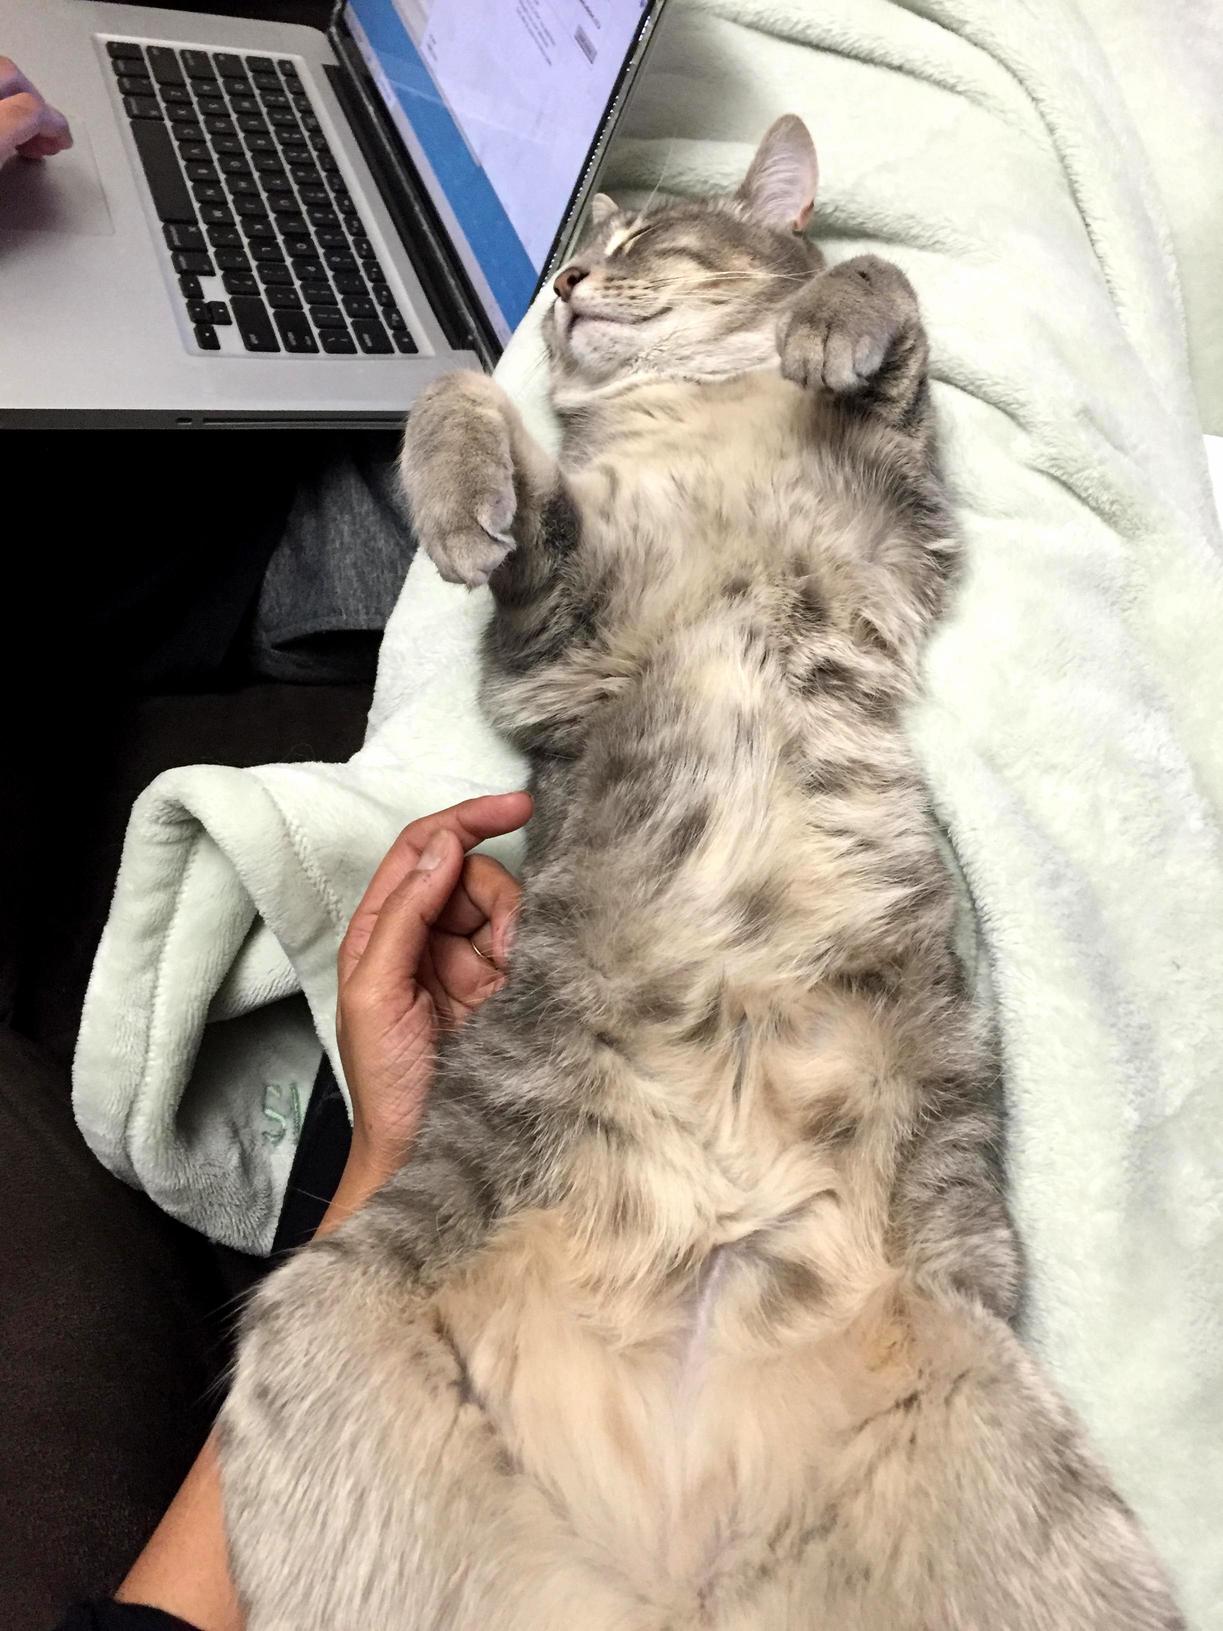 That fluffy belly